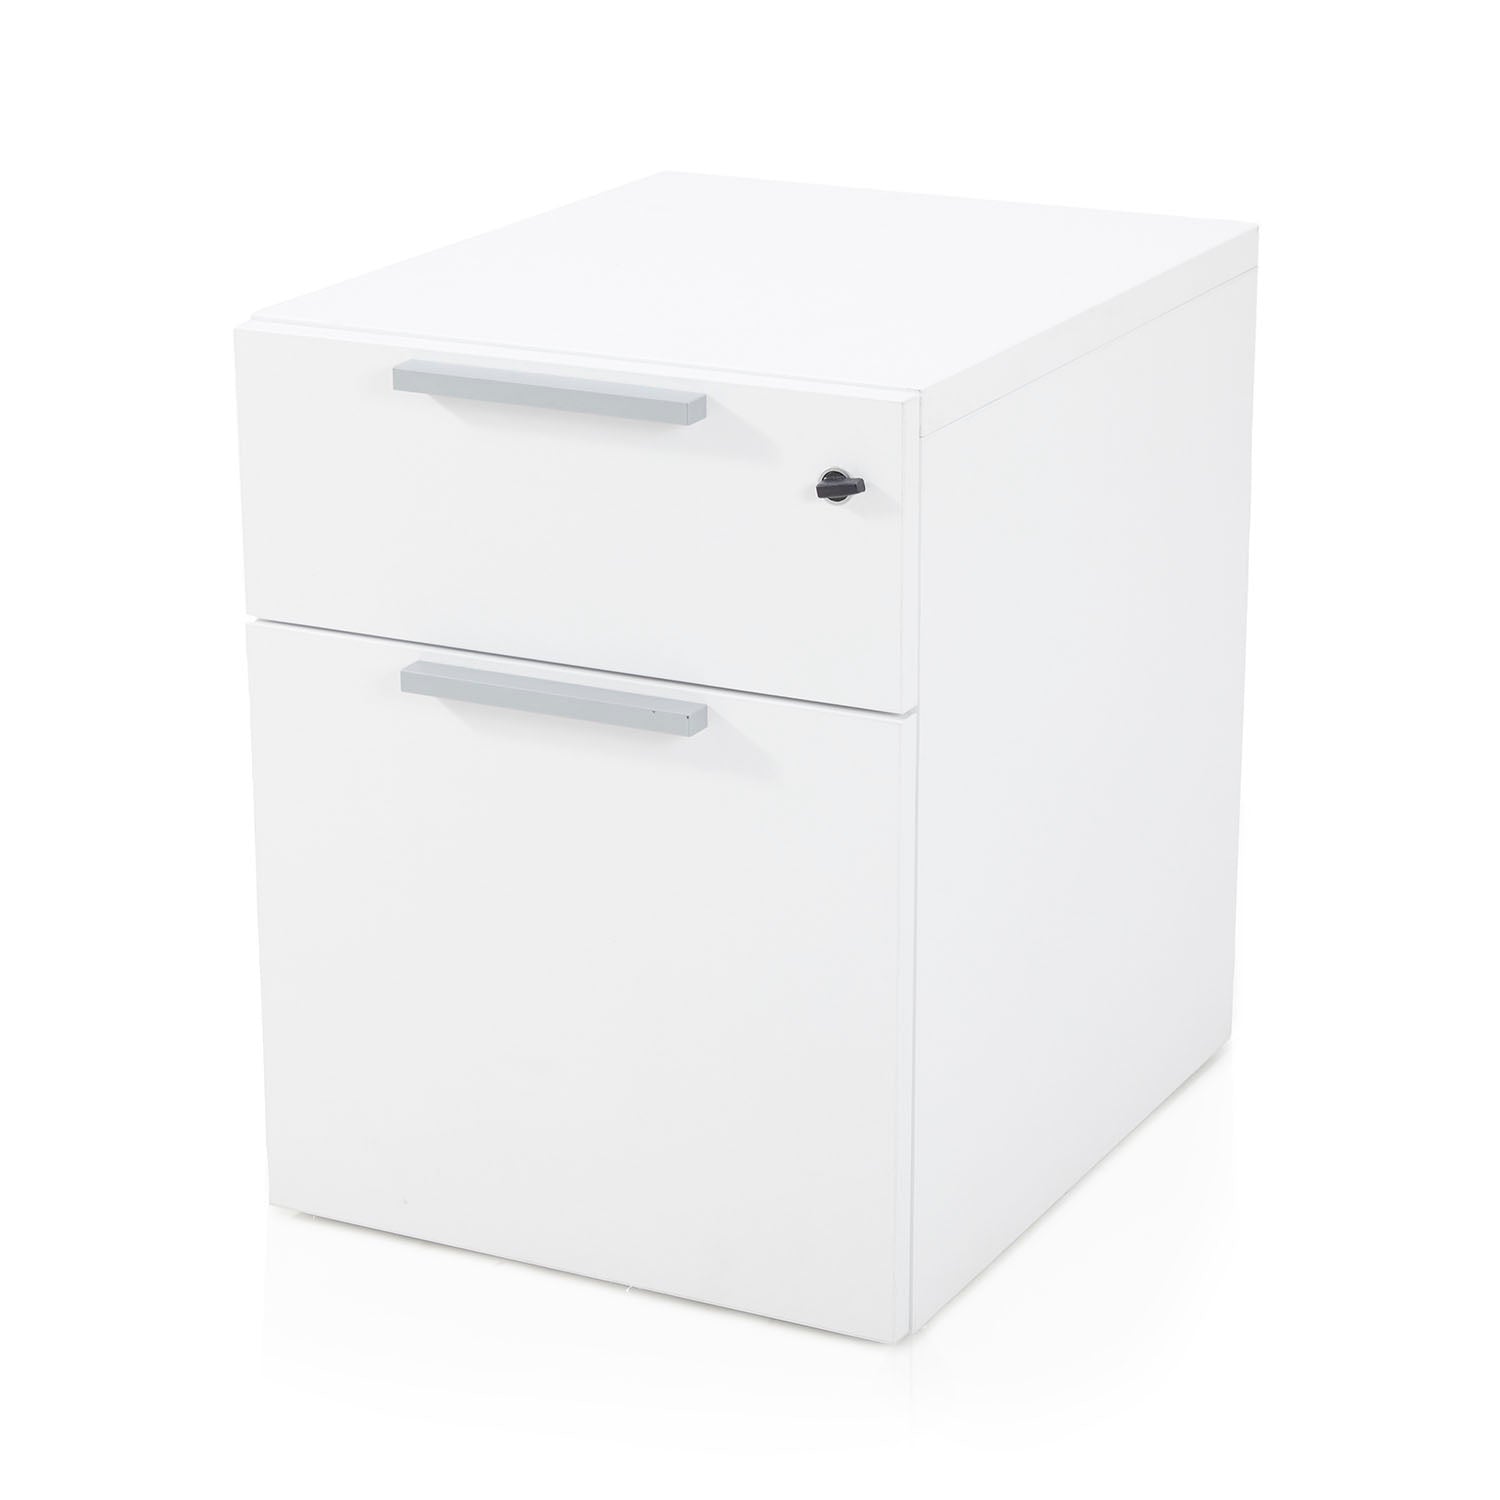 Furniture Standing Furniture Filing Cabinets Tagged